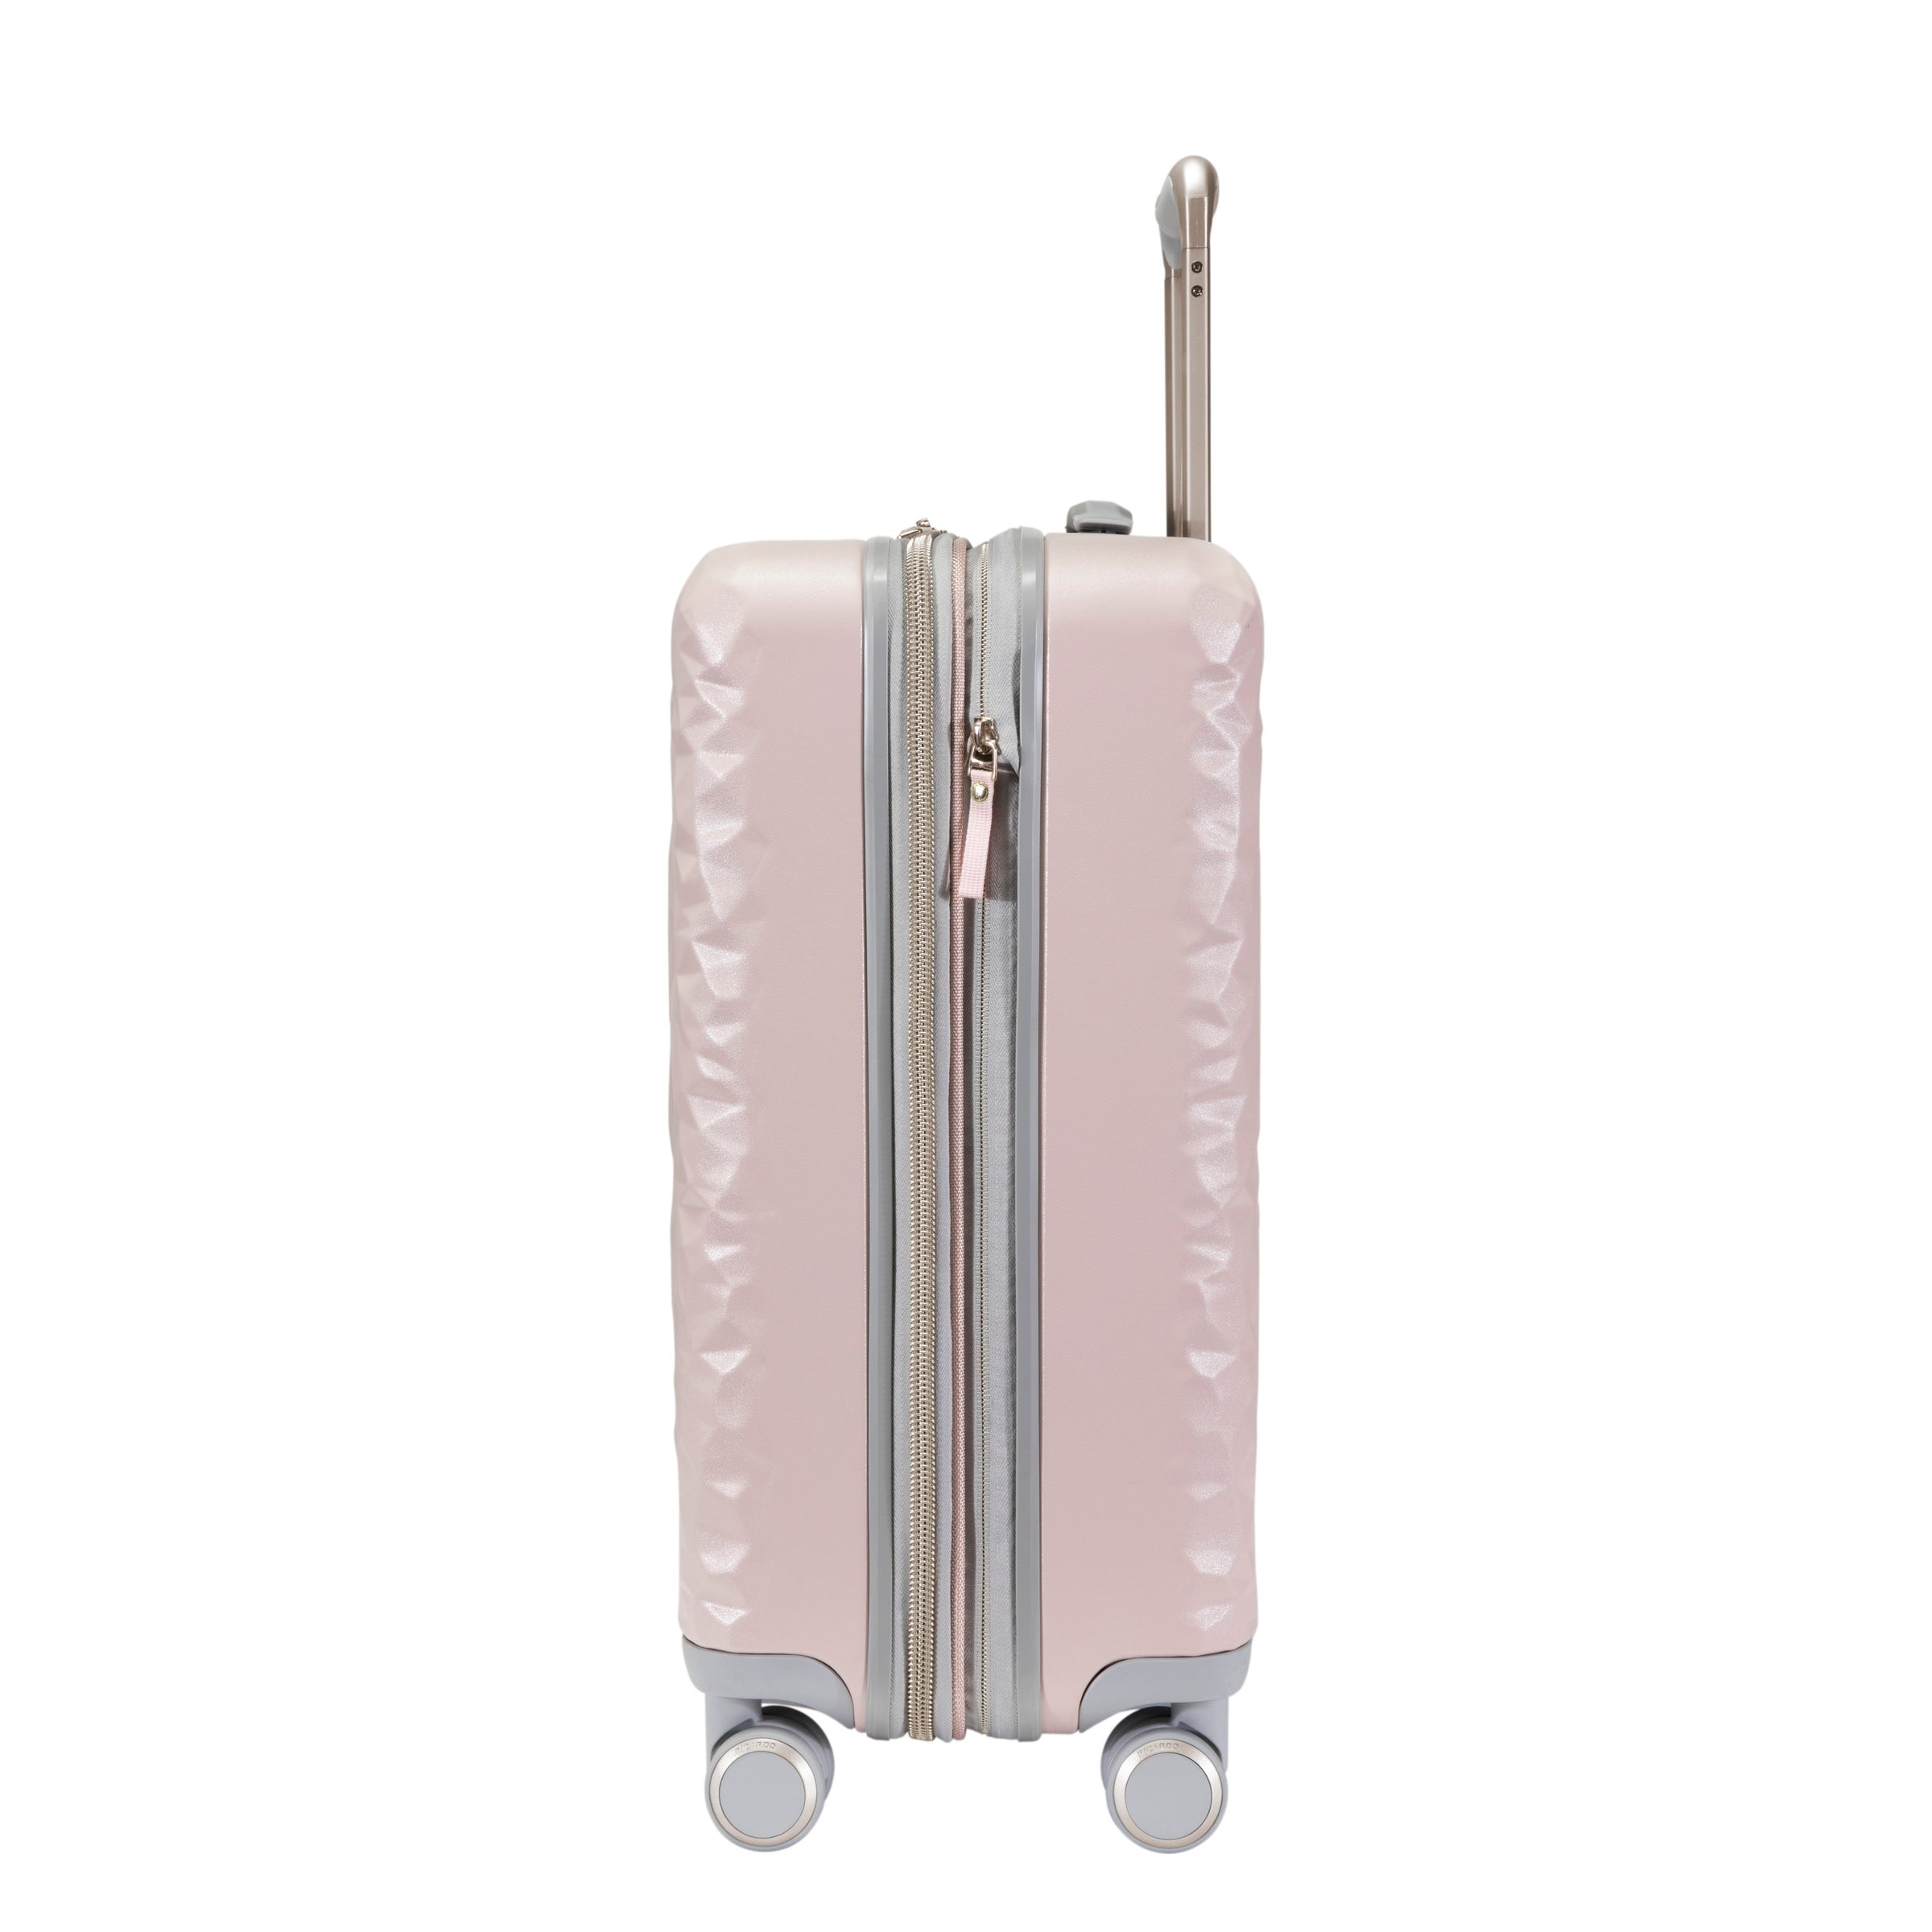 side view of blush pink carry on suitcase with grey and metallic accents 